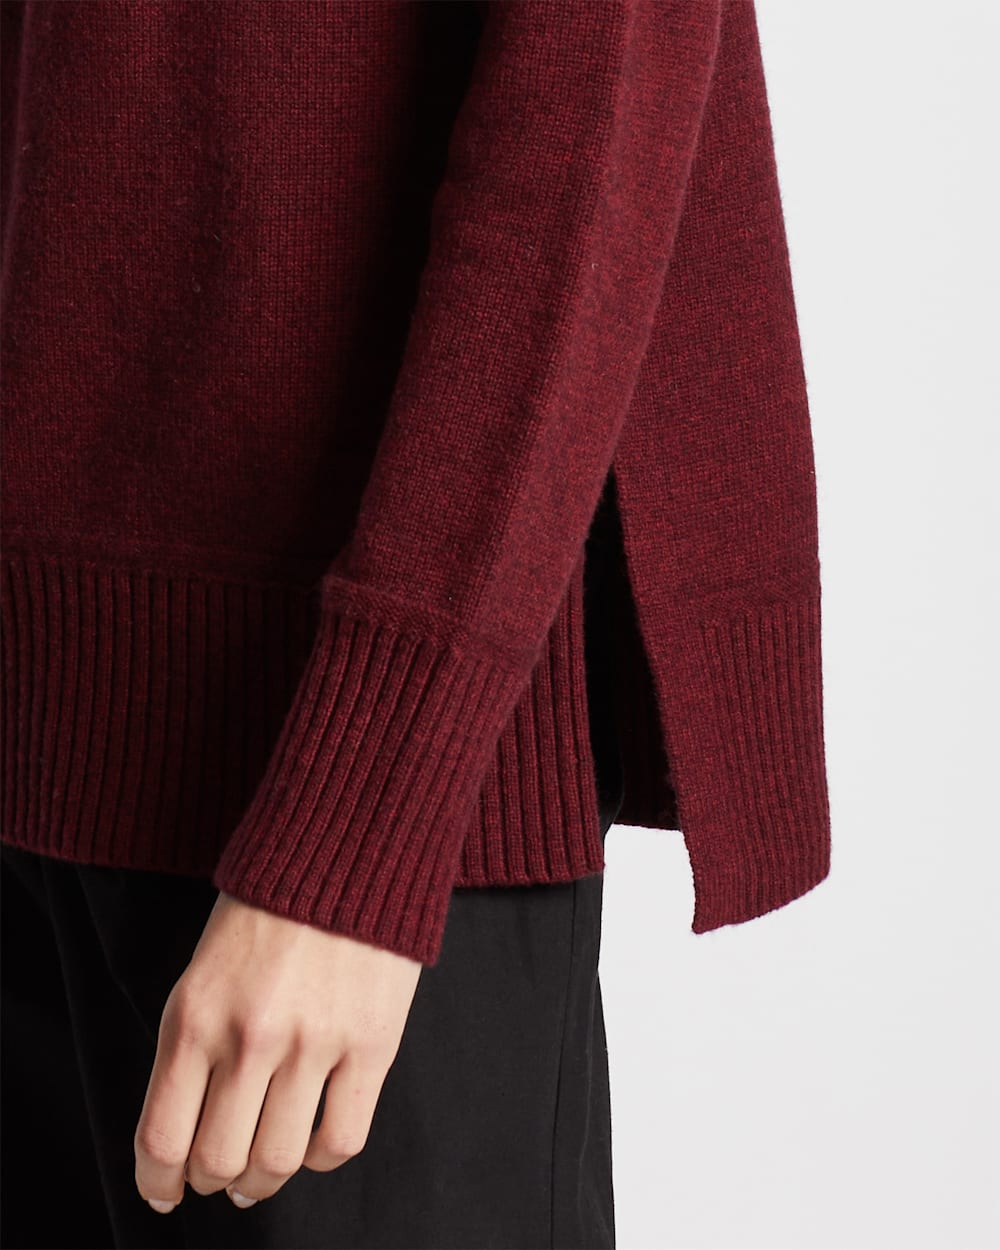 ALTERNATE VIEW OF WOMEN'S MERINO/CASHMERE OVERSIZED TURTLENECK IN BERRY PRESERVE image number 6